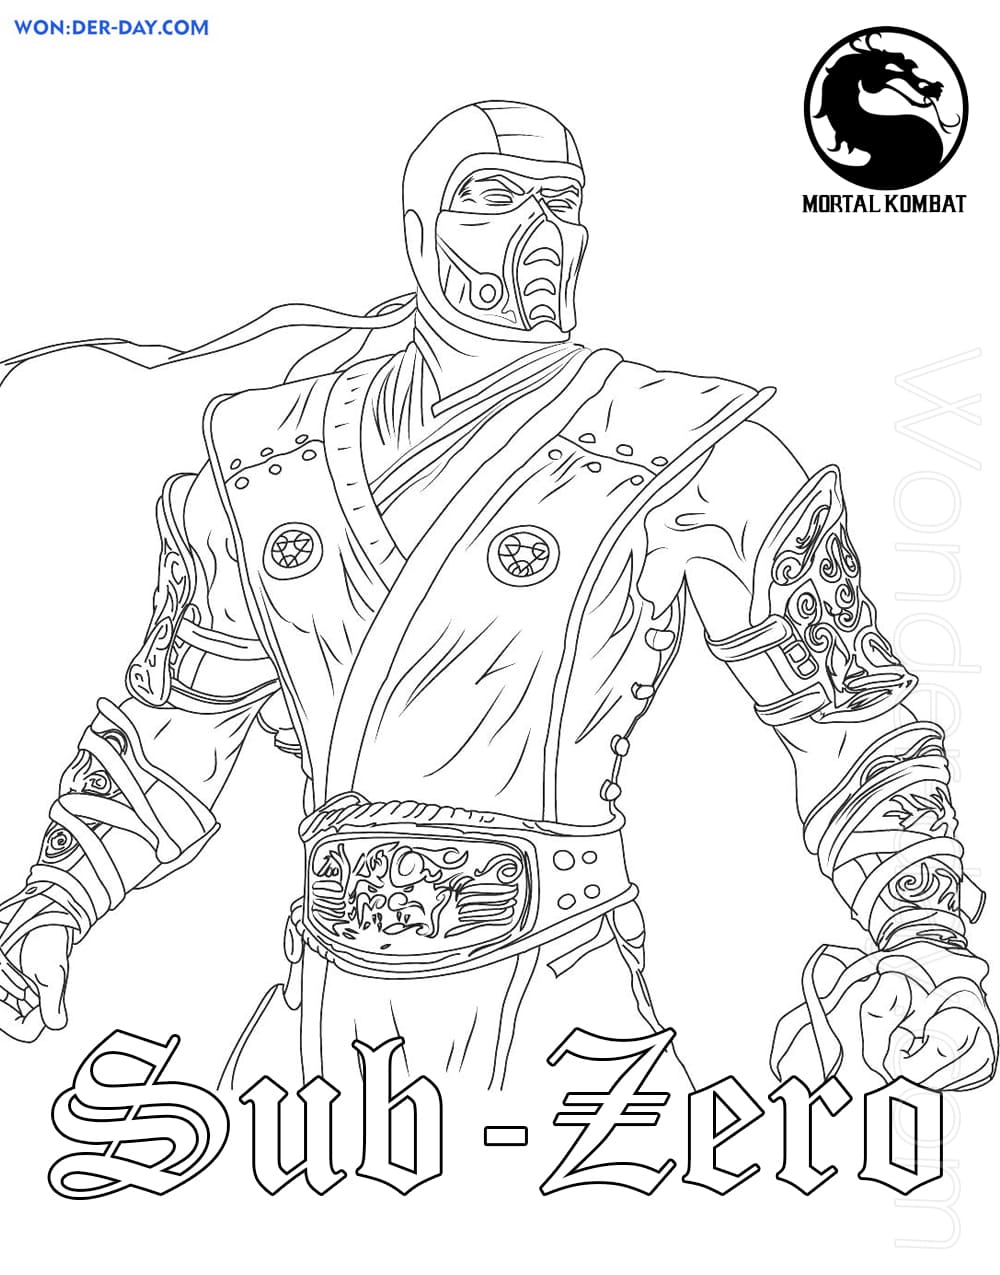 Download Sub Zero Coloring Pages 90 Free Coloring Pages Wonder Day Coloring Pages For Children And Adults